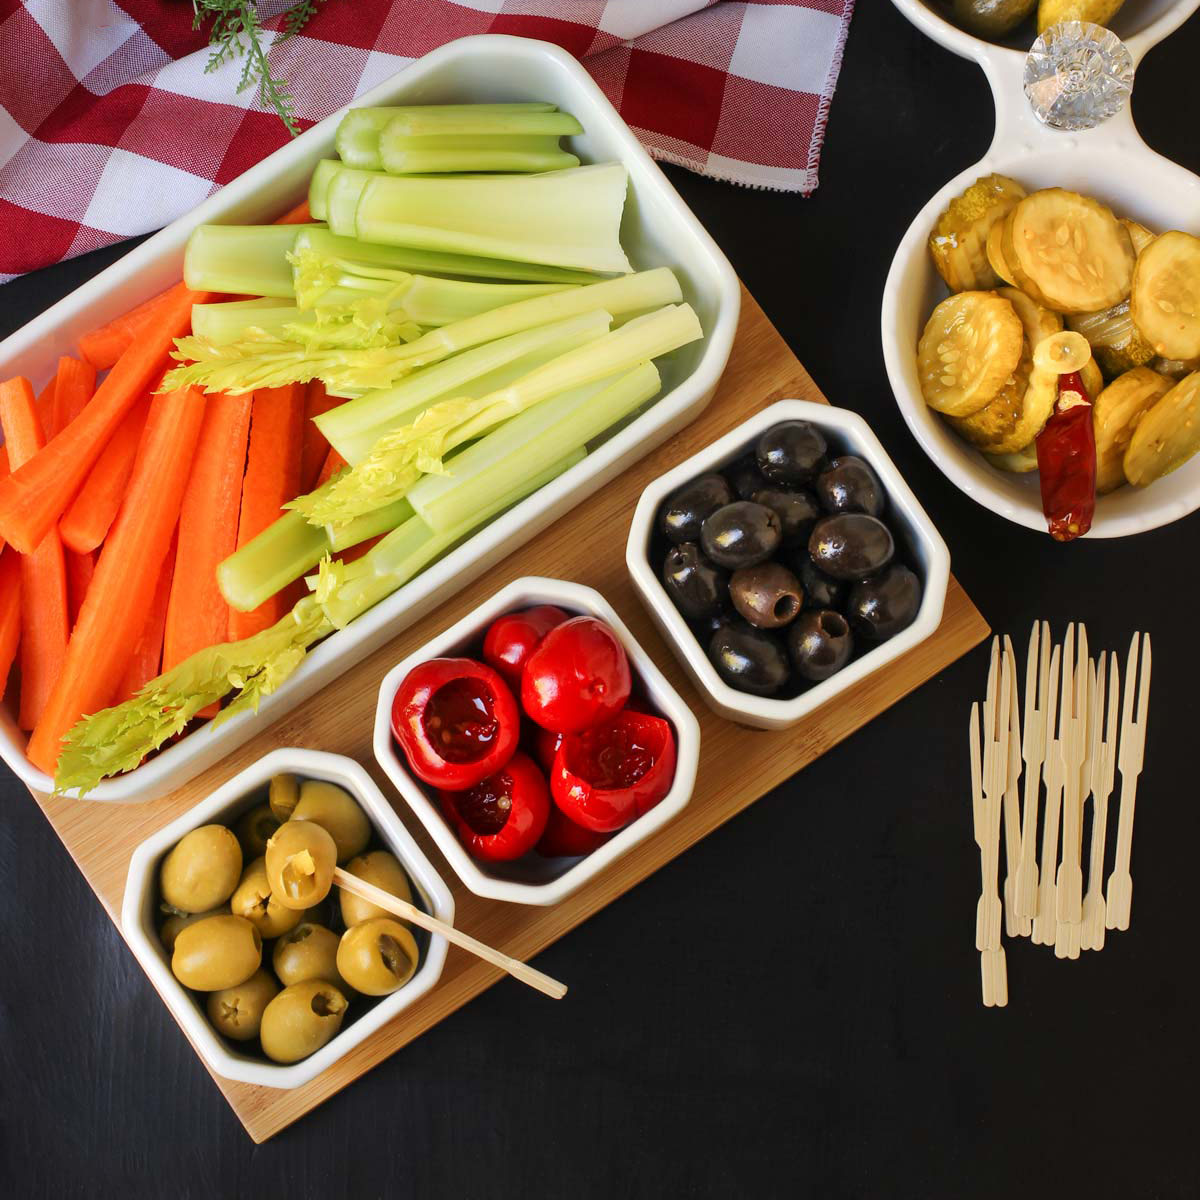 5 Snack Tray Ideas That Are Fun for the Whole Fam! - Fun Cheap or Free